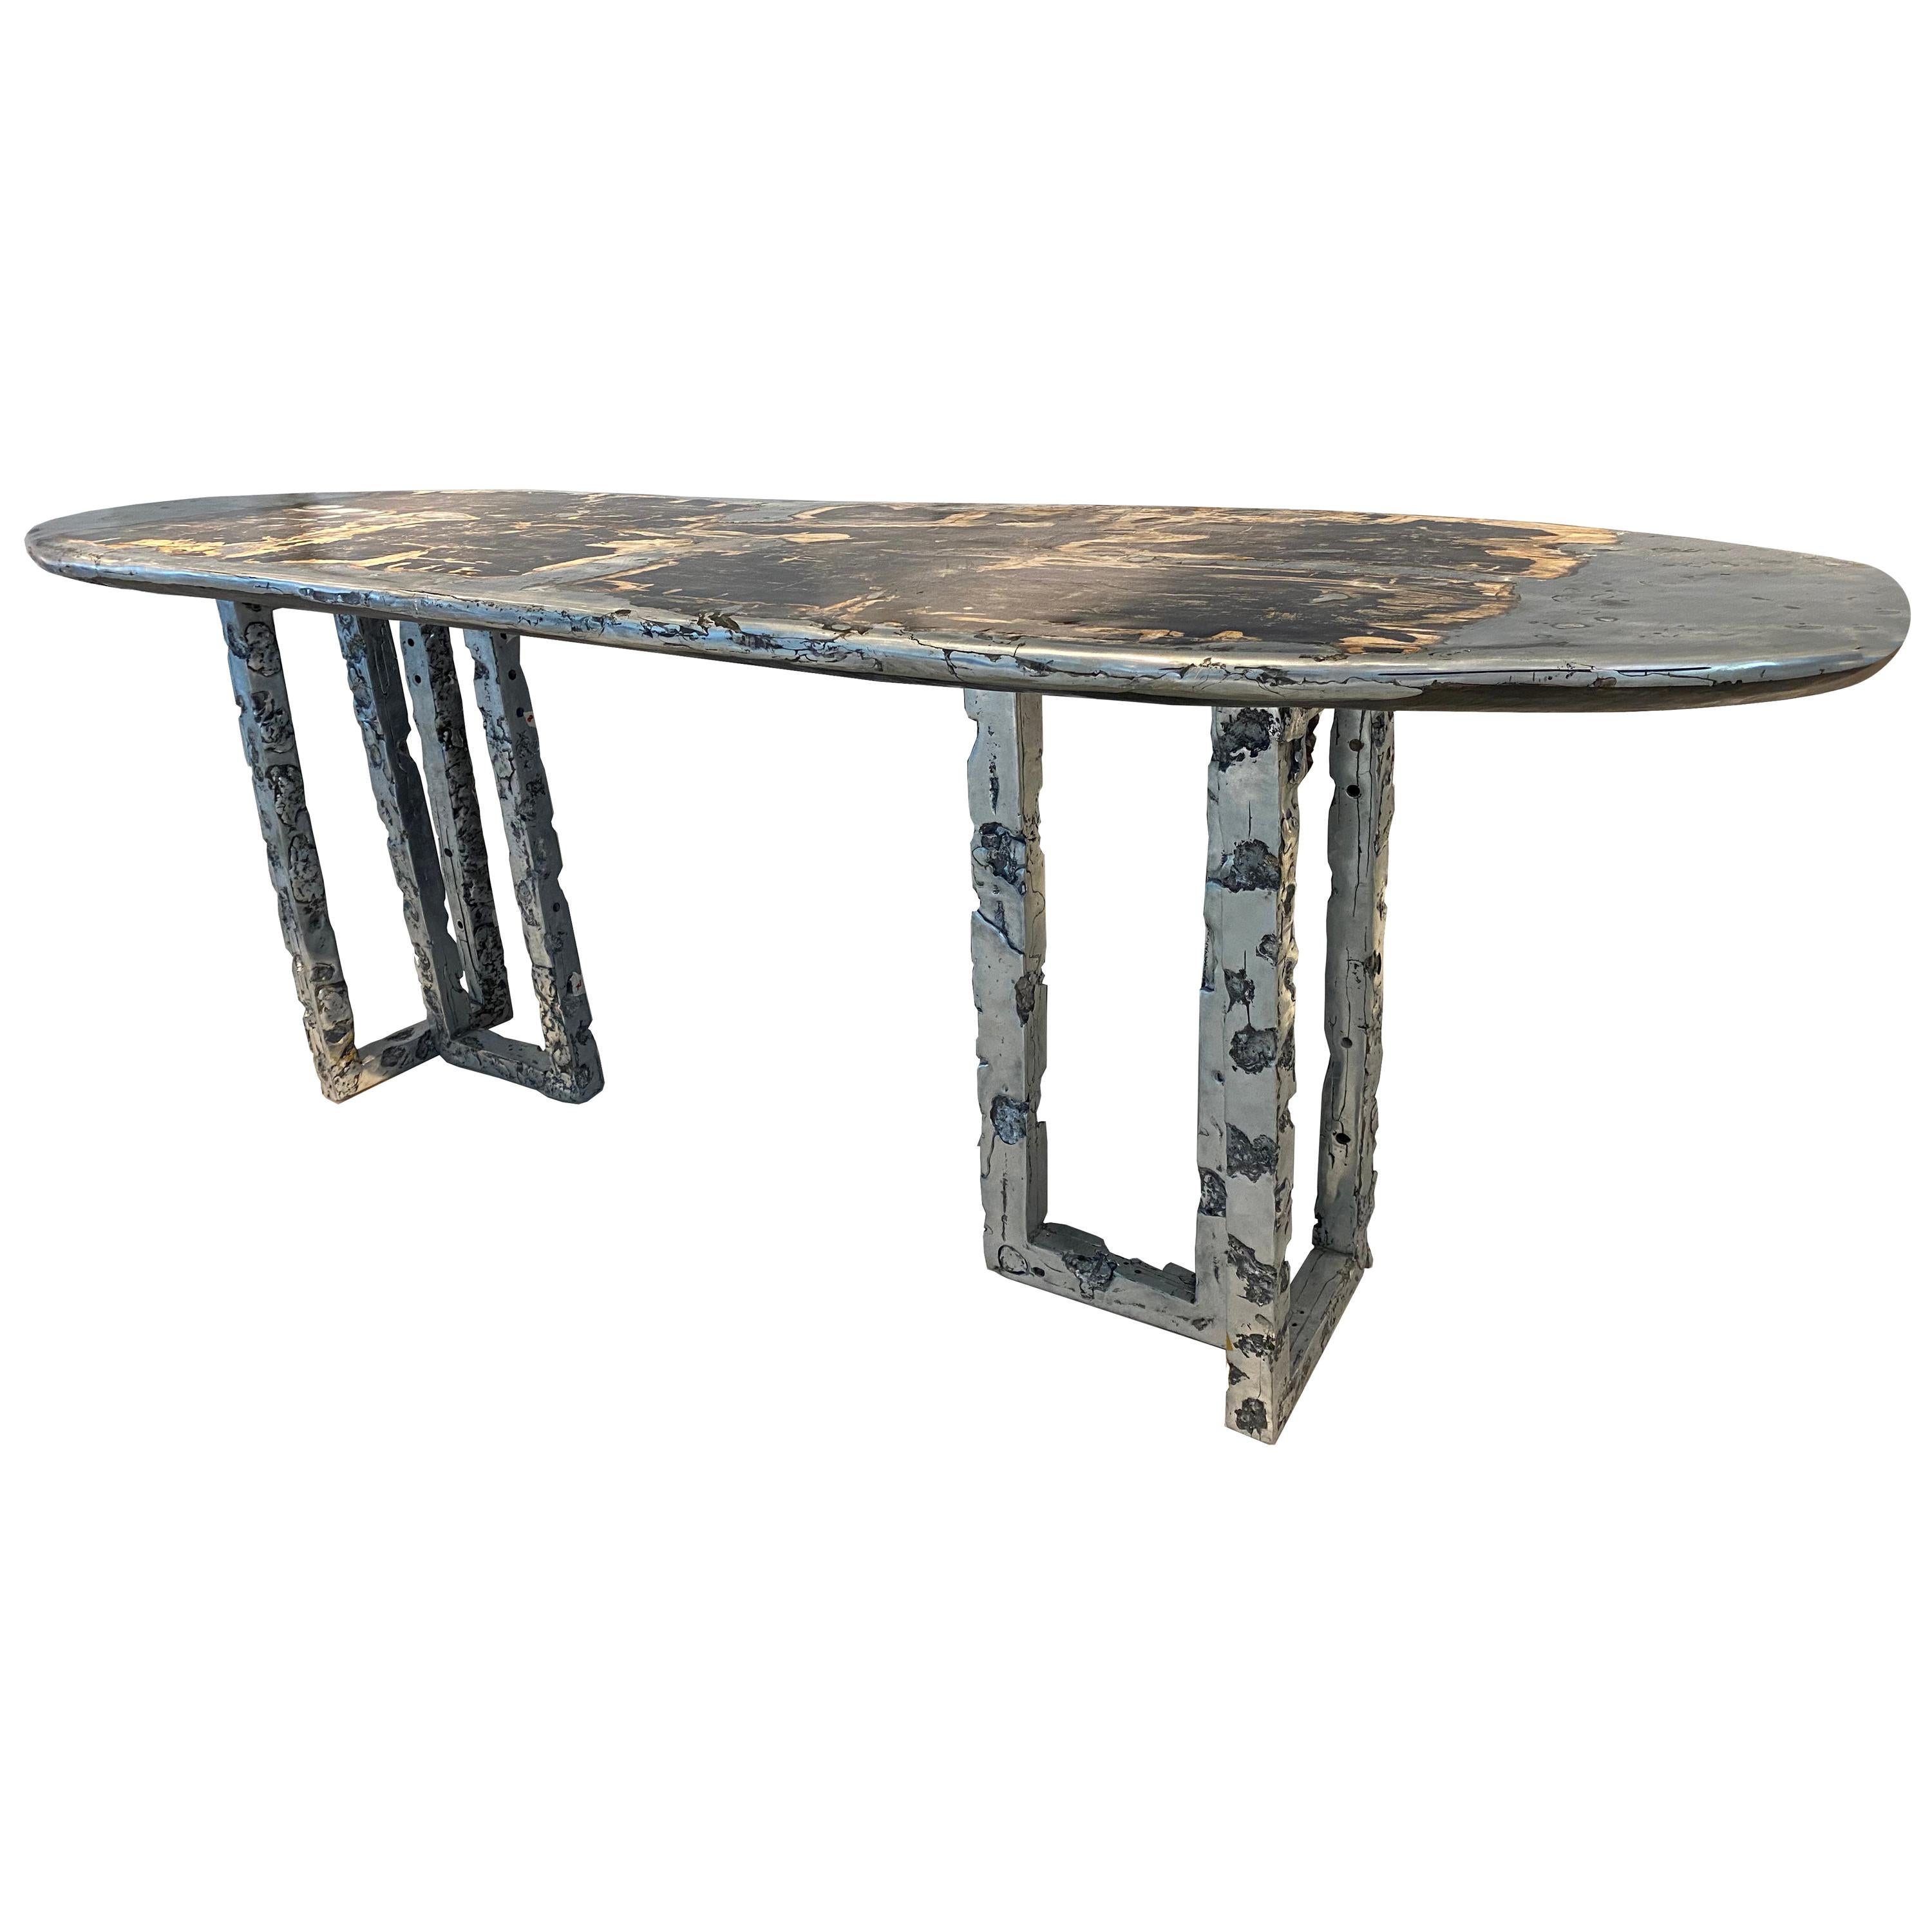 One of a Kind Silver Surfer Convertible Desk and Coffee Table